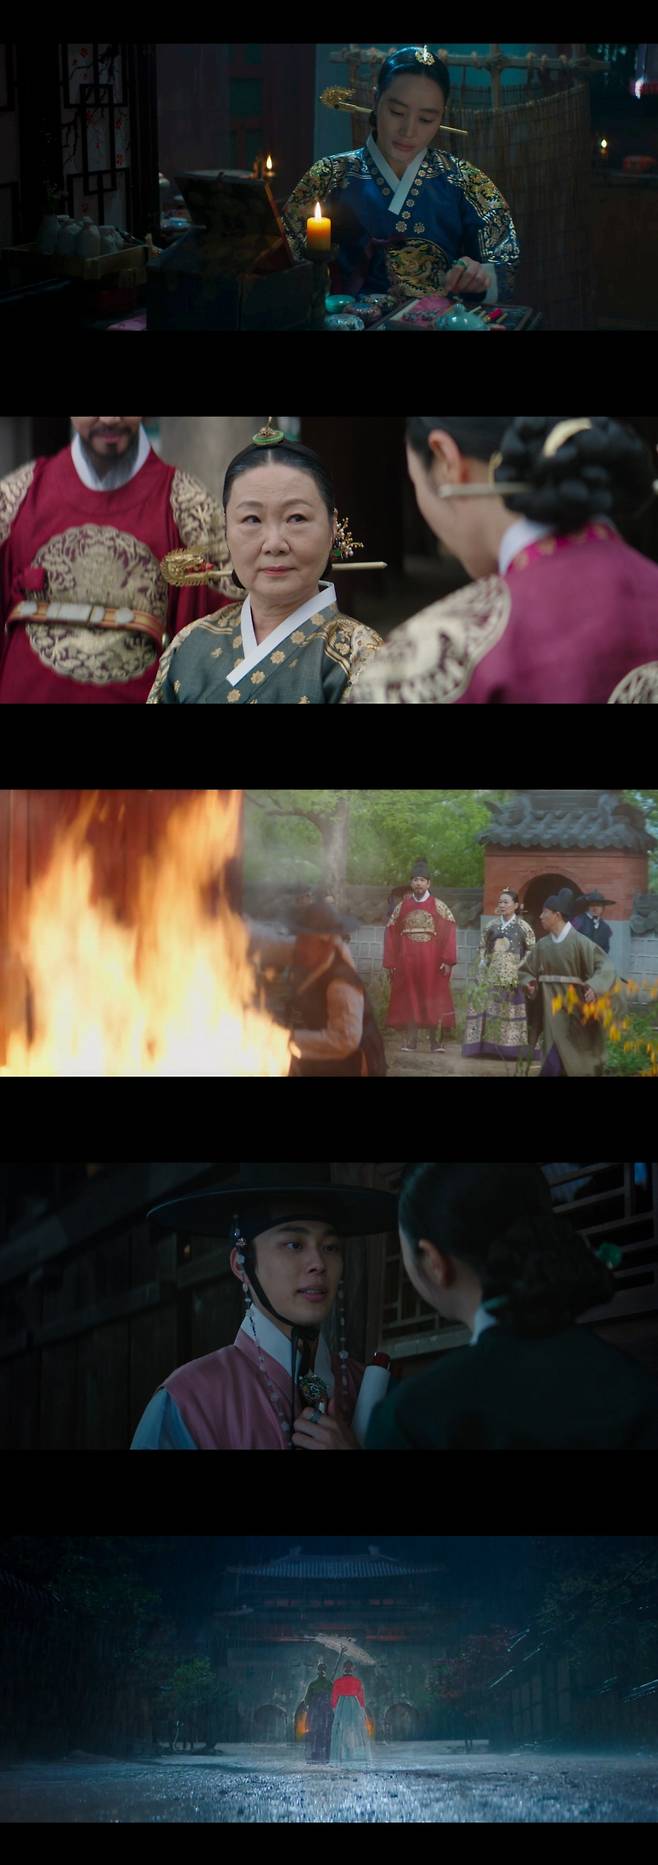 Schrup, played by Kim Hye-soo, was big and cozy.In the broadcast on this day, the power of love of the Queen Hwaryeong (Kim Hye-soo), who protects the sick Crown Prince (played by Bae In-hyuk) from the outside by disguising himself as a blood graft and embracing the heart of Sejo of Joseon (played by Yoo Sun-ho), was depicted.First of all, there was a selection ceremony for the alumni to study alumni together with the taxa in the city hall, and the various scenes of the court ladies who passed the child were caught in the eye.As soon as everyone enjoyed the thrilling tension, the Hwaryeong of the middle war was having a hellish time holding the hands of the pale taxa.The Crown Princes condition was getting worse day by day. There was no intention to treat it, and there were no records left. In the hands of the Queen, all the bed logs recorded by the Crown Prince were all.The more the taxa did not show up, the more rumors about comfort had to be found, and Hwaryeong had to find a way to devote himself safely to treatment.Hwaryeong decided to contact the crown prince and asked King Lee Ho (Choi Won-young) to take a rest during the trial period, but this was a shield to divert attention from the palace, and he began intensive treatment at the Junggungjeon under the guise of the crown prince.Hwaryeong, who took a moment, looked at Sejo of Joseon next. I had to keep him away from the lungs for the duration of the test, but unfortunately Sejo of Joseons Secret has already reached the ears (Kim Hye-soo).It would be a pleasure to prepare for the rebirth of the middle war.Therefore, the brains of Hwaryeong and Daebi were fiercely unfolded. Daebi guided the king to the lungs with the excuse of a walk and made Hwaryeong Stradivarius.Hwaryeong leaped out of Stradivarius and leaped to the end of the war, knowing that this place was a plot to reveal the Secret of Sejo of Joseon.Then, before the king and the contrast reached the lungs, Hwaryeong burned the lungs one step ahead of him to prevent him from confirming the existence of the secret chamber.The middle warfare and contrast that faced each other again uncovered the inside and set the day toward each other.The cold-blooded aspect of the contrast that Sejo of Joseons disgrace would be revealed to all in front of him was so fierce that the bony response of the Hwaryeong to the contrast that burned all the possibilities of the bloodshed was heavy.Although the crisis had been managed to subside, Sejo of Josés heart was breaking, and the fact that his mother, knowing who he really was, had destroyed his world without a word came as a further blow.With Sejo of Joseon pouring tears, the hwaryeong outside the palace stopped in a studio, and following the puzzled expression of Sejo of Joseon, the painters brush slipped on the paper.At the end of the brush, the Portrait of GLOW was completed, and the main character was Sejo of Joseon, who looked like GLOW. His eyes filled with tears as he looked at Portrait.When she first knew Secret in the secret room, she was in shock and confusion, but she thought of herself as Sejo of Joseon.The last hours of the child who had to realize and receive a different mind from others made the heart of the hwaryeong.The hwaryeong who embraced Sejo of Joseon, who held Portrait in his arms, said, Everyone has something else in mind, but you can not live with it.If you want to see your true self at any time, open your picture and look at it. It took time to fully understand and receive your child, but the courage of the Hwaryeong, which is a mother, caused a calm wave in the room.On a rainy night, the rear view of Hwaryeong and Sejo of Joseon, who tilted Umbrella to their children, turned into a picture, and the ending scene left in the form of mother and daughter gave a deep impression and a long longevity.The tvNs Saturday-Sunday drama Schrup, which showed a mothers great love that protects her childrens well-being as well as their hearts from Crown Prince to Sejo of Joseon, will air its fourth episode at 9:10 p.m. today (23rd).